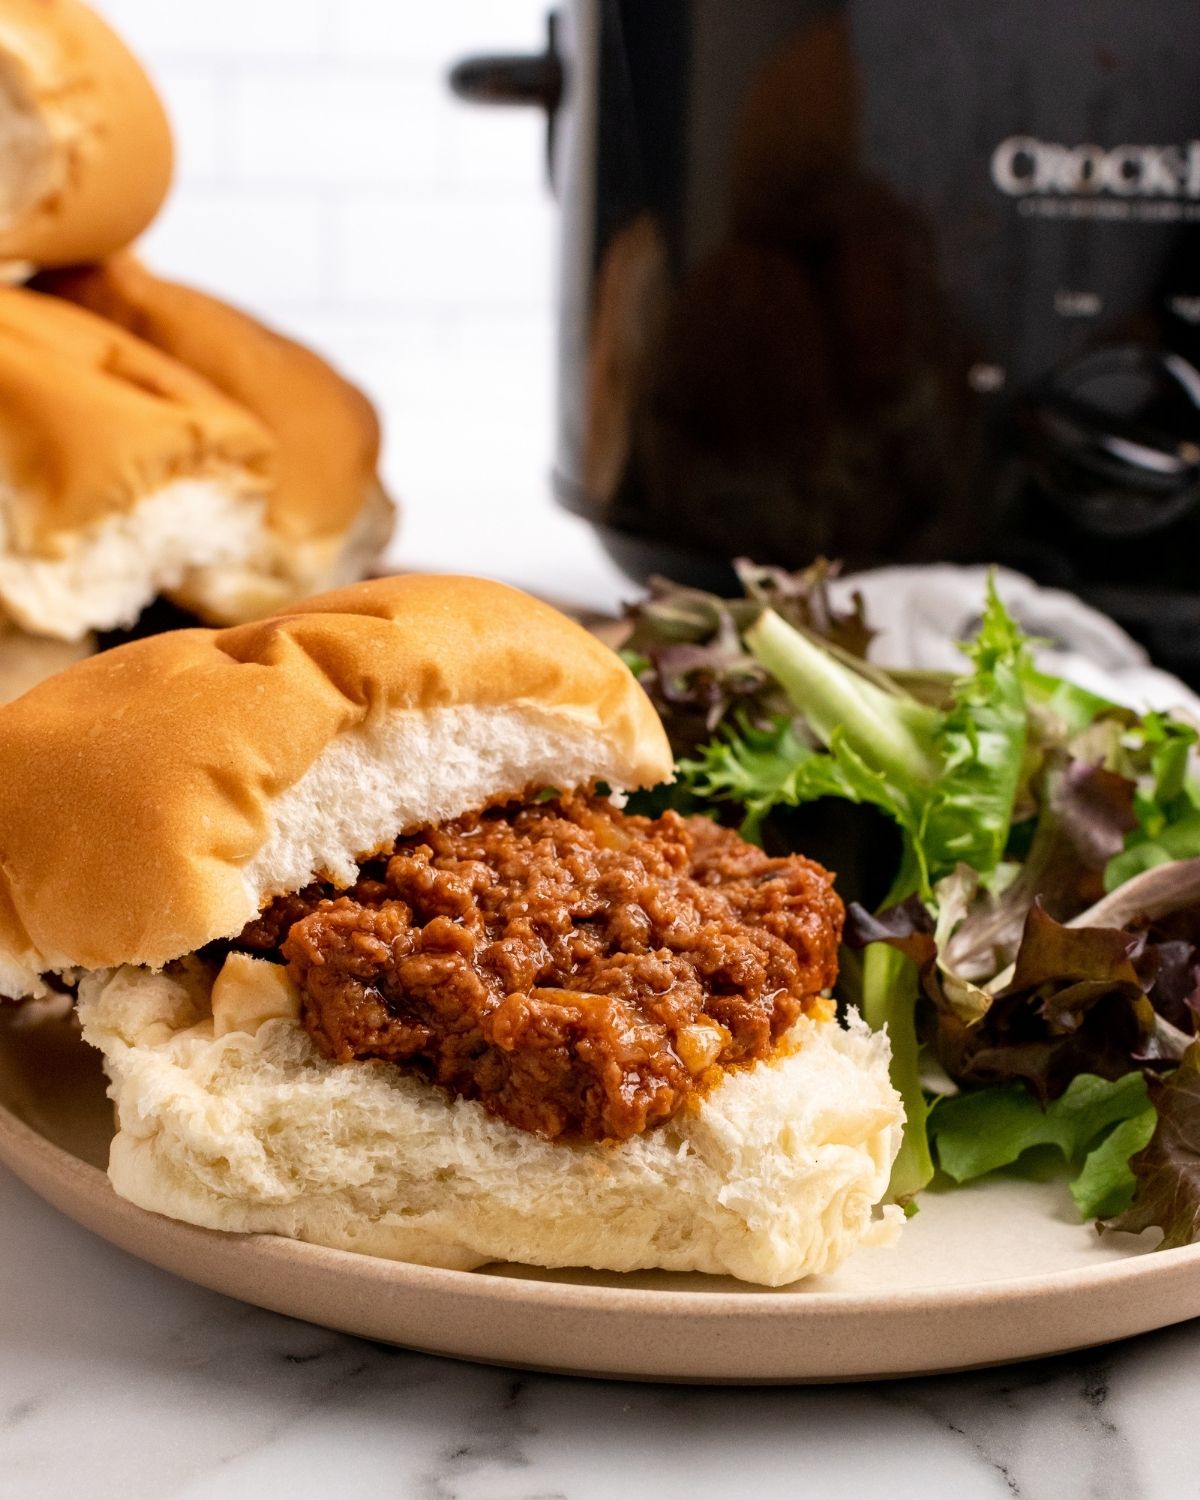 sloppy Joe on a bun on plate with salad and the Crockpot in the background.